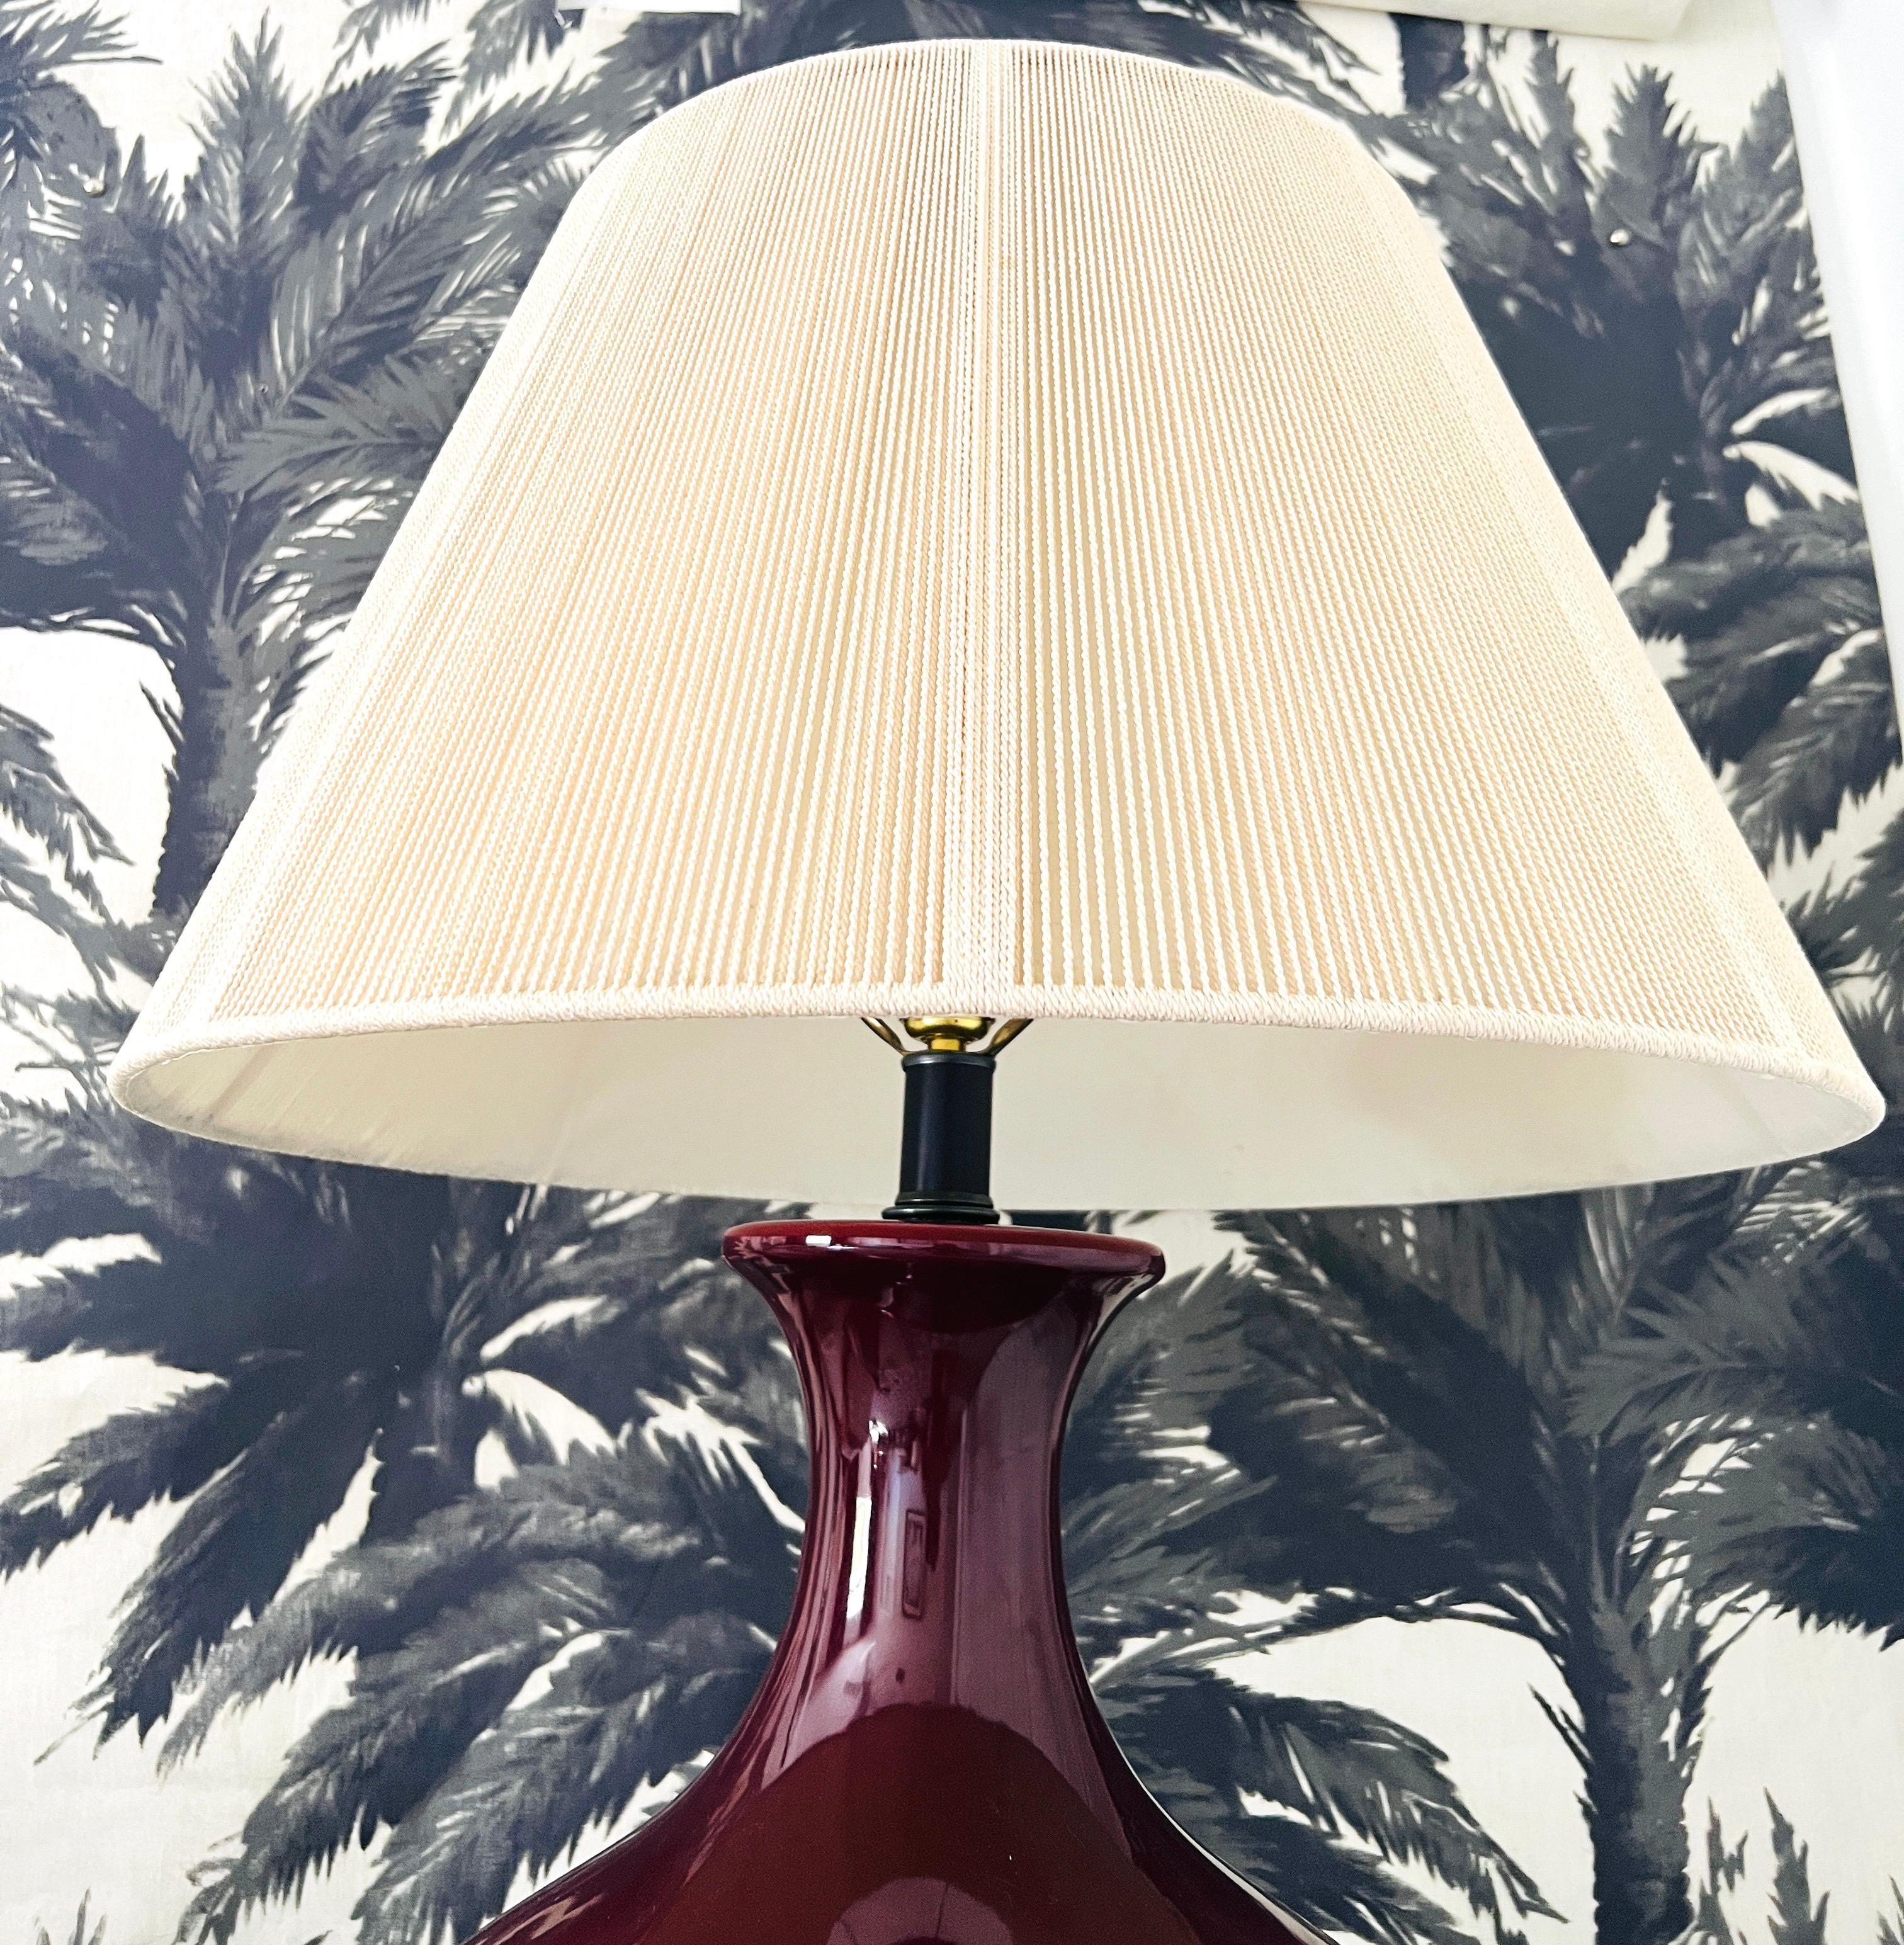 Monumental Porcelain Oxblood Lamp in Burgundy Red by Marbro, c. 1970's 4